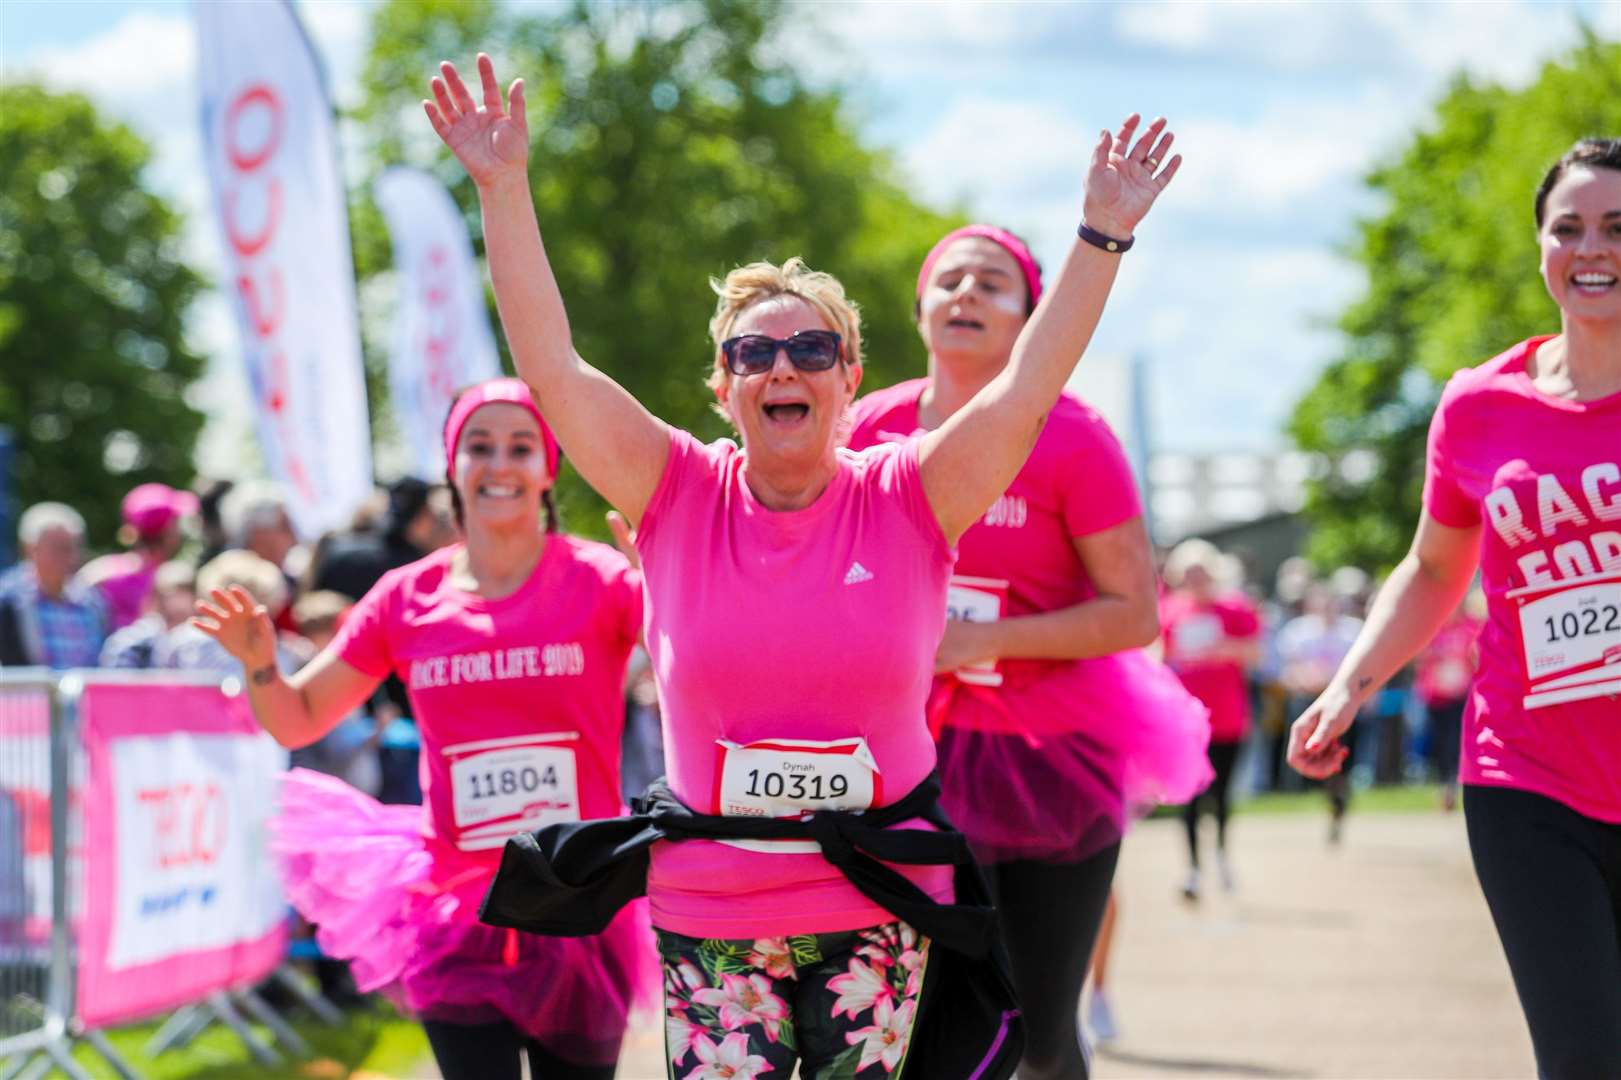 Race for Life is back in 2021 in Kent